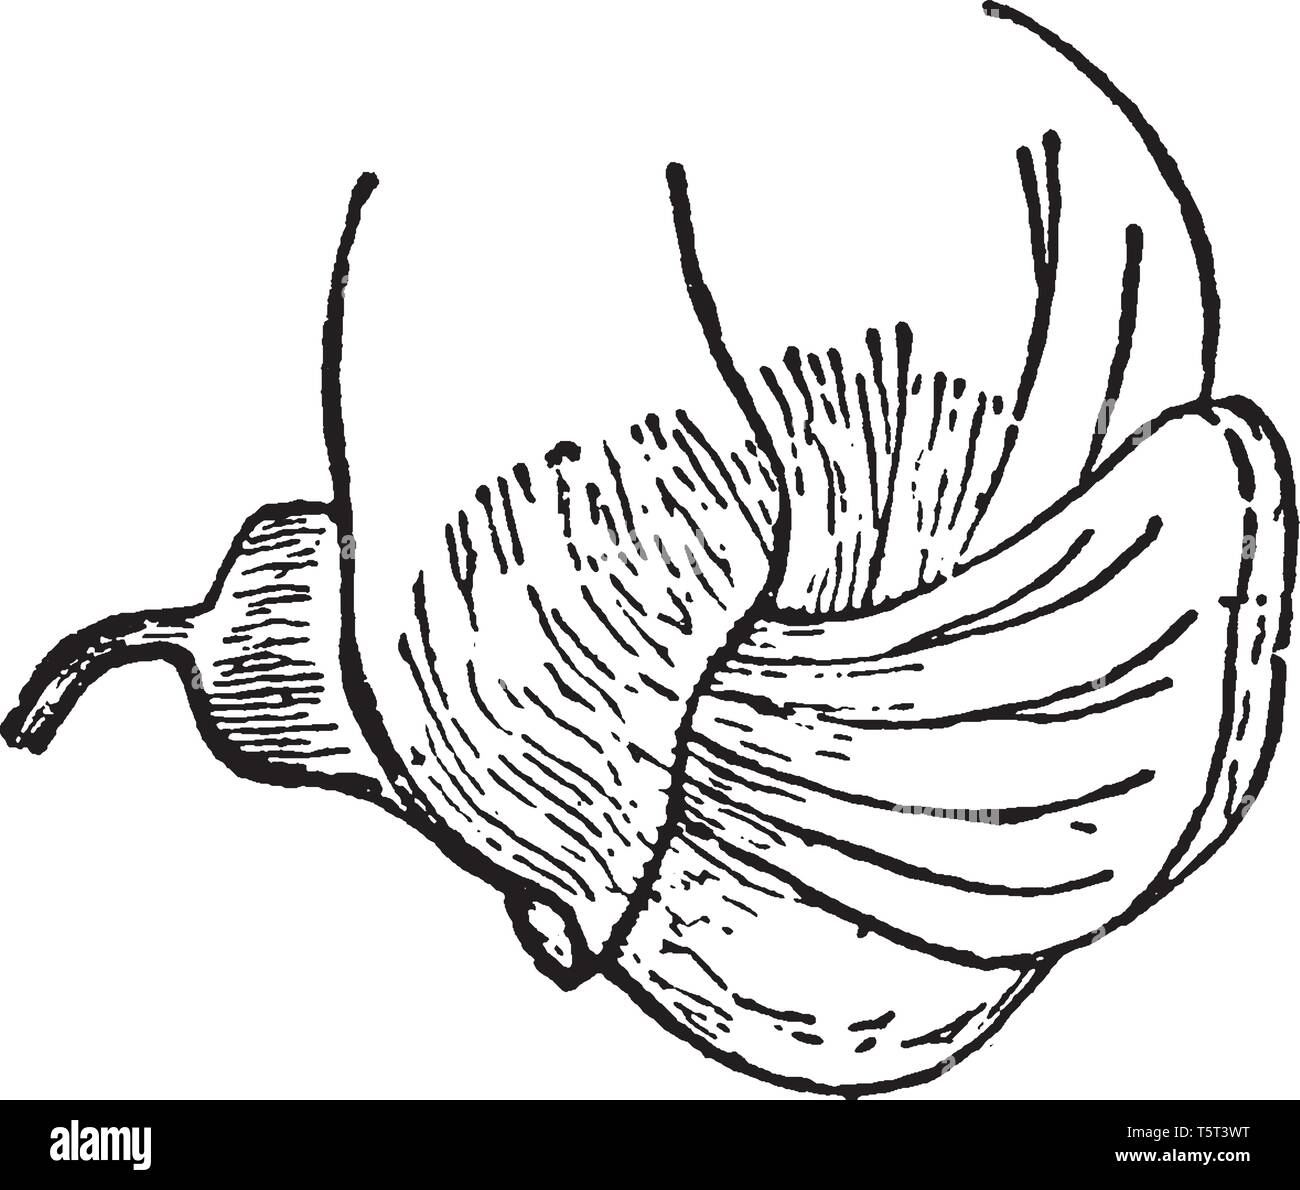 Pisum Sativum are flowers with the characteristic irregular and butterfly-like corolla, picture shows a growing petal of the flower. The wings in turn Stock Vector